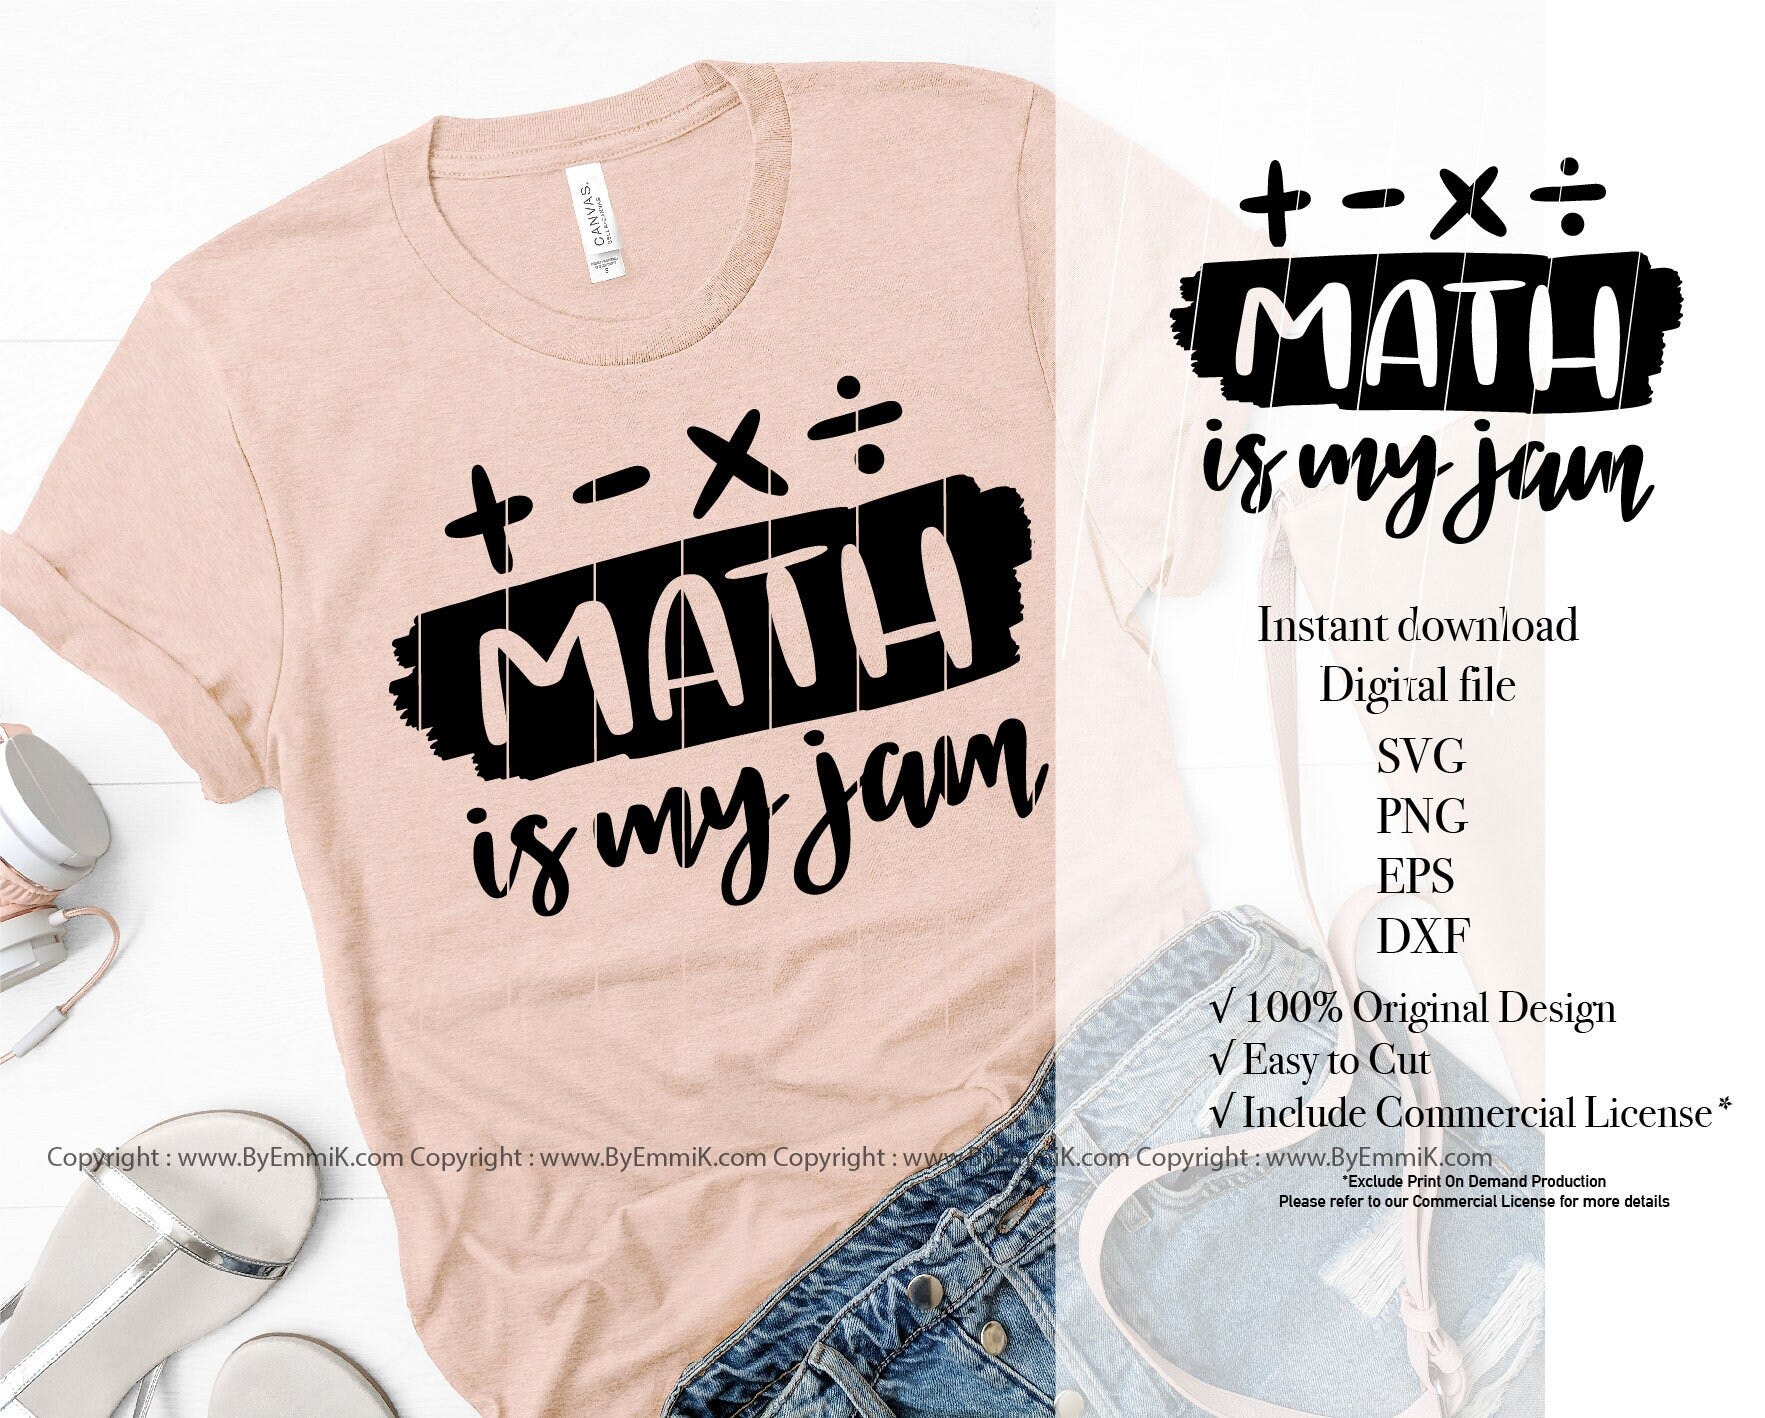 math teacher svg, math is my jam svg, instant download svg,eps,png,dxf, free commercial design for t shirt, decal, stencil, vinyl iron on